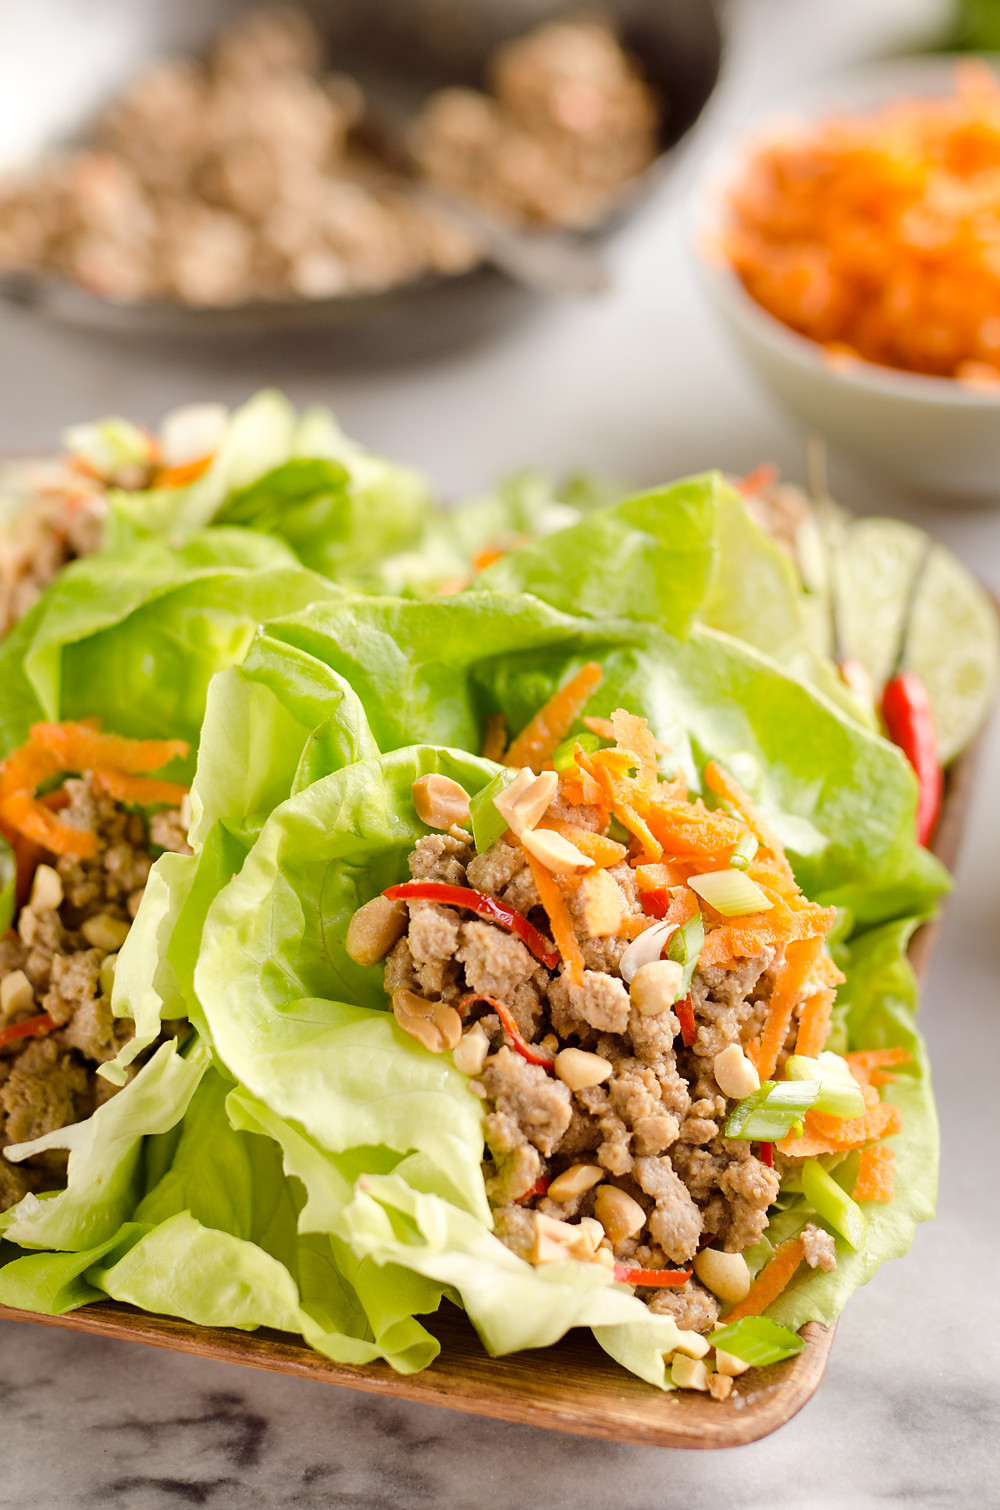 Healthy Dinner With Ground Turkey
 Healthy Weekly Meal Plan 51 Yummy Healthy Easy